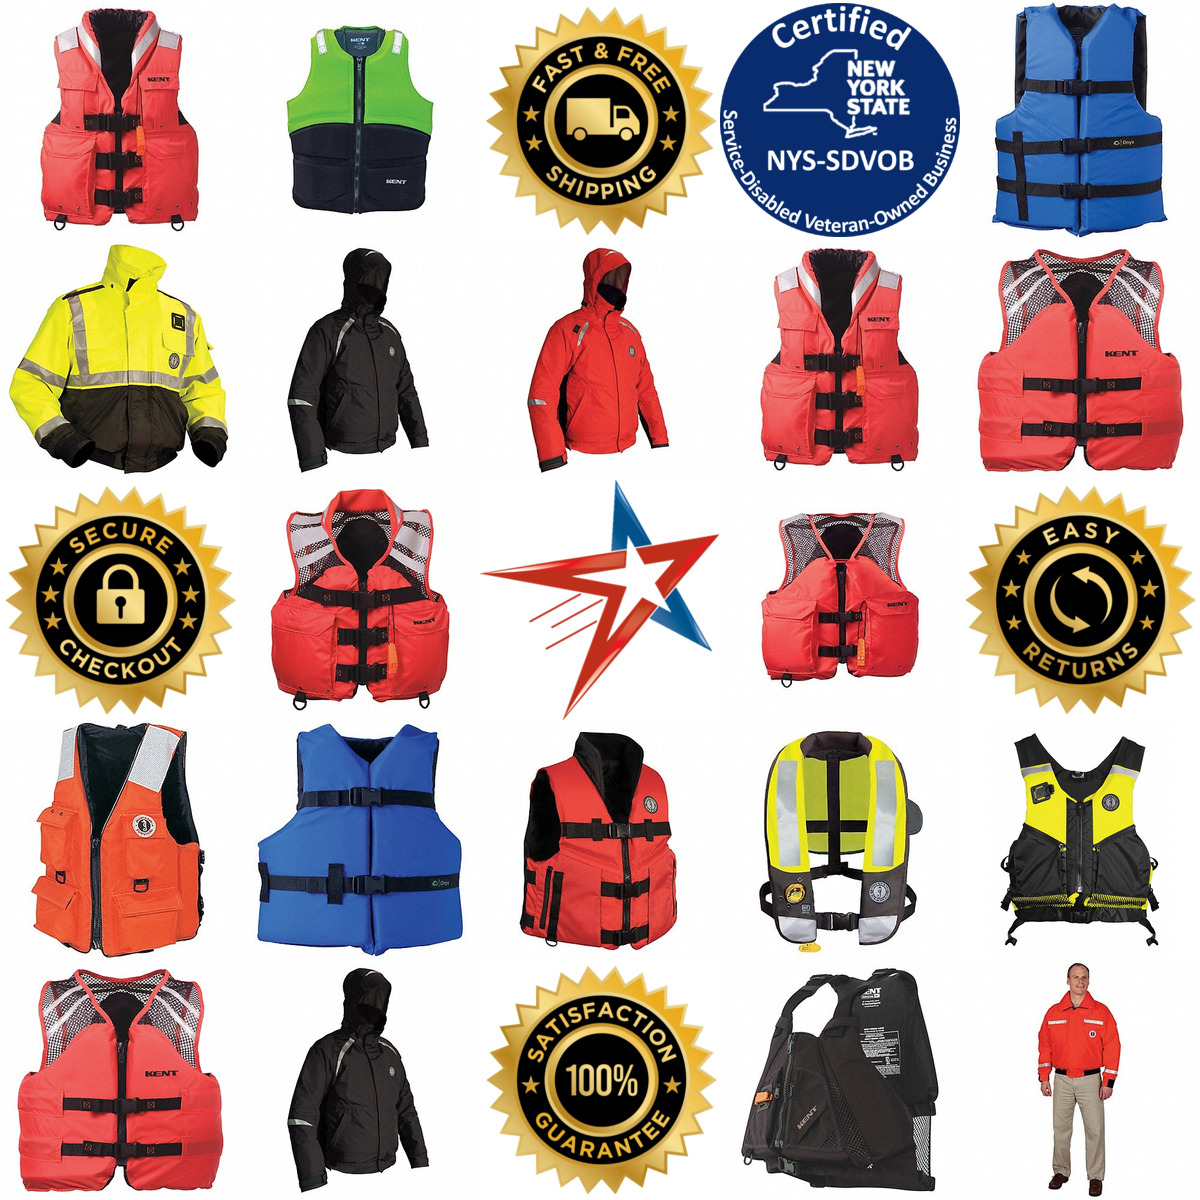 A selection of Life Jackets and Pfds products on GoVets